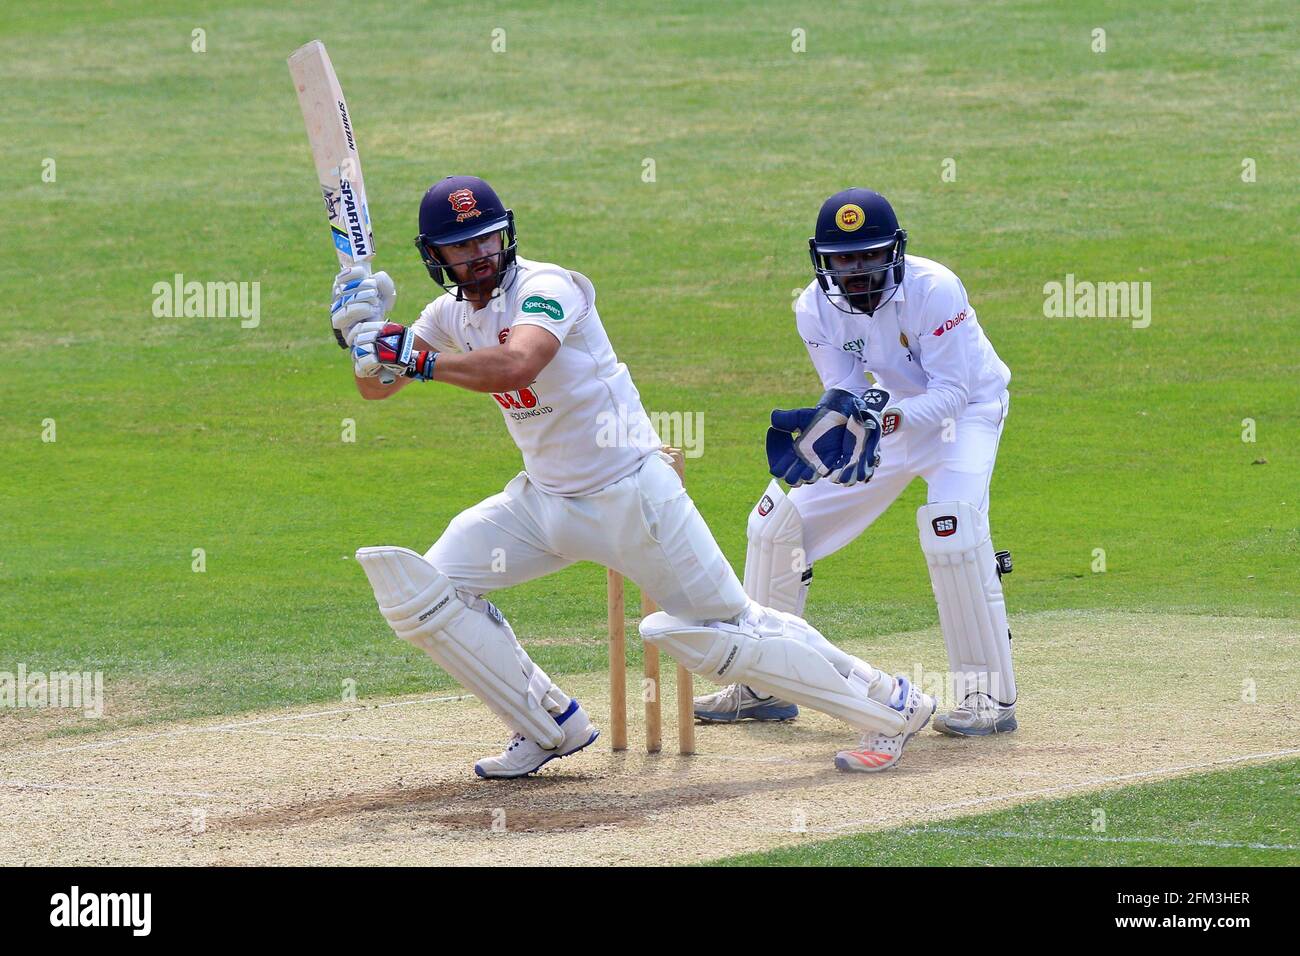 Jaik Mickleburgh in batting action for Essex as Dinesh Chandimal of Sri Lanka looks on from behind the stumps during Essex CCC vs Sri Lanka, Tourist M Stock Photo